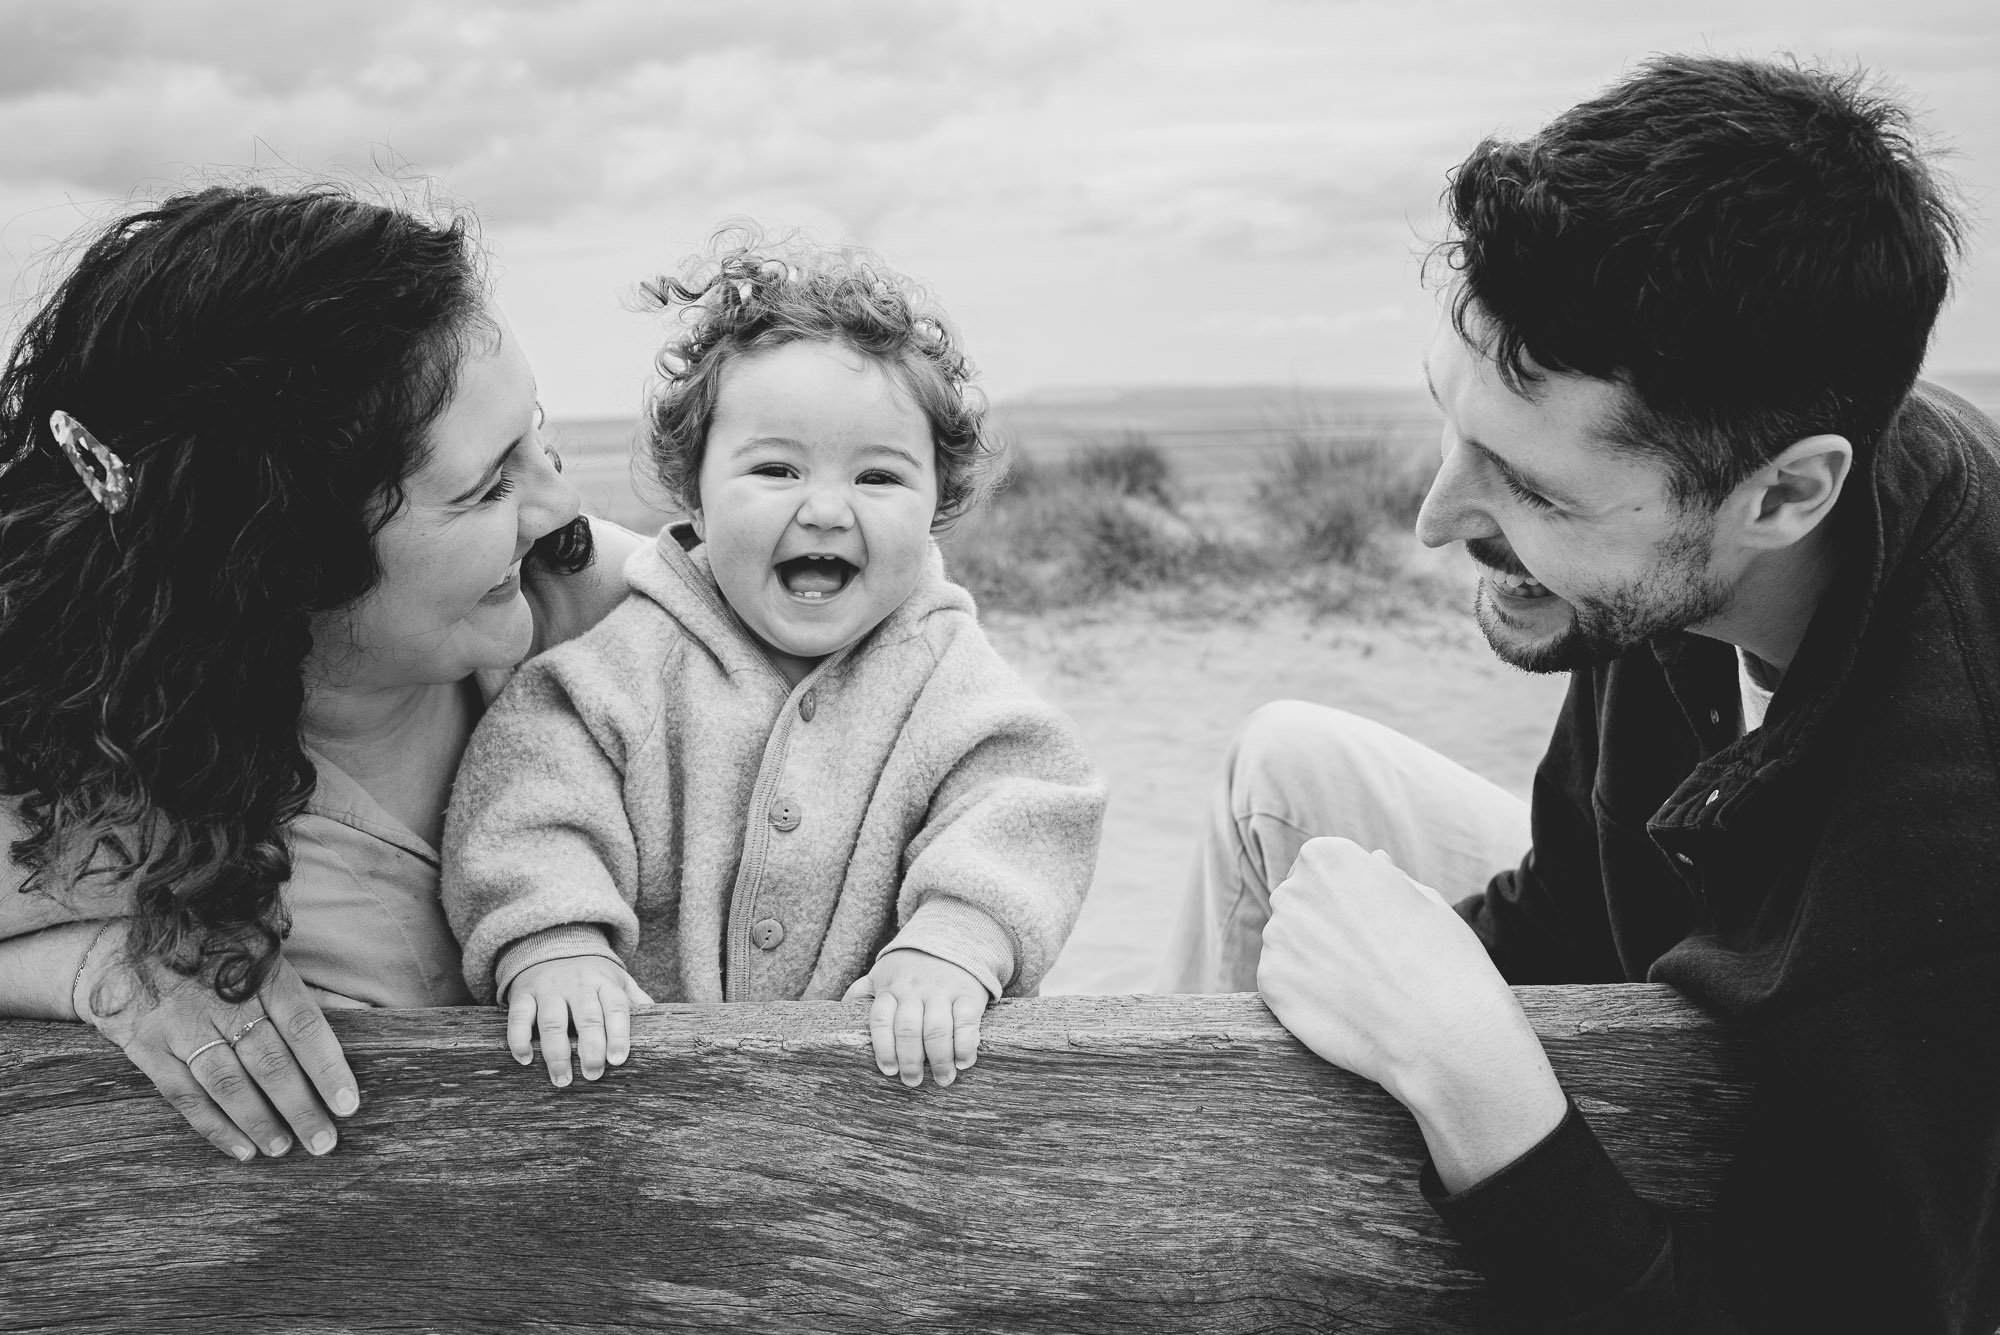 parents-toddler-portrait-laughing-sitting-on-bench-in-sand-west-wittering-beach-west-sussex-family-photography.jpg